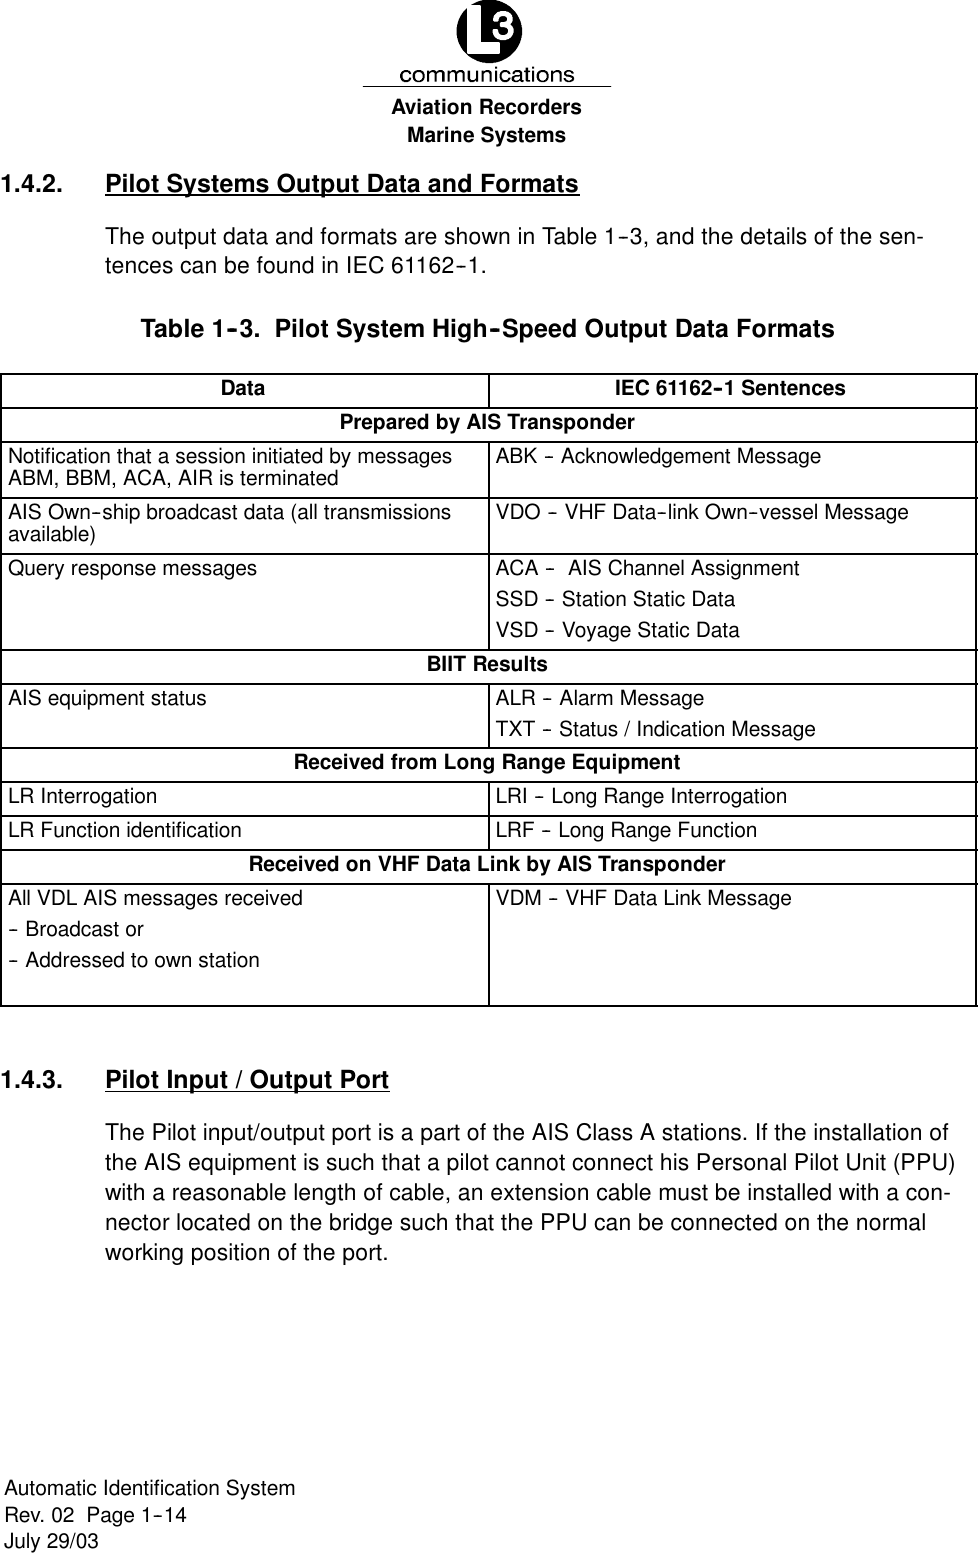 Marine SystemsAviation RecordersRev. 02 Page 1--14July 29/03Automatic Identification System1.4.2. Pilot Systems Output Data and FormatsThe output data and formats are shown in Table 1--3, and the details of the sen-tences can be found in IEC 61162--1.Table 1--3. Pilot System High--Speed Output Data FormatsData IEC 61162--1 SentencesPrepared by AIS TransponderNotification that a session initiated by messagesABM, BBM, ACA, AIR is terminated ABK -- Acknowledgement MessageAIS Own--ship broadcast data (all transmissionsavailable) VDO -- VHF Data--link Own--vessel MessageQuery response messages ACA -- AIS Channel AssignmentSSD -- Station Static DataVSD -- Voyage Static DataBIIT ResultsAIS equipment status ALR -- Alarm MessageTXT -- Status / Indication MessageReceived from Long Range EquipmentLR Interrogation LRI -- Long Range InterrogationLR Function identification LRF -- Long Range FunctionReceived on VHF Data Link by AIS TransponderAll VDL AIS messages received-- Broadcast or-- Addressed to own stationVDM -- VHF Data Link Message1.4.3. Pilot Input / Output PortThe Pilot input/output port is a part of the AIS Class A stations. If the installation ofthe AIS equipment is such that a pilot cannot connect his Personal Pilot Unit (PPU)with a reasonable length of cable, an extension cable must be installed with a con-nector located on the bridge such that the PPU can be connected on the normalworking position of the port.